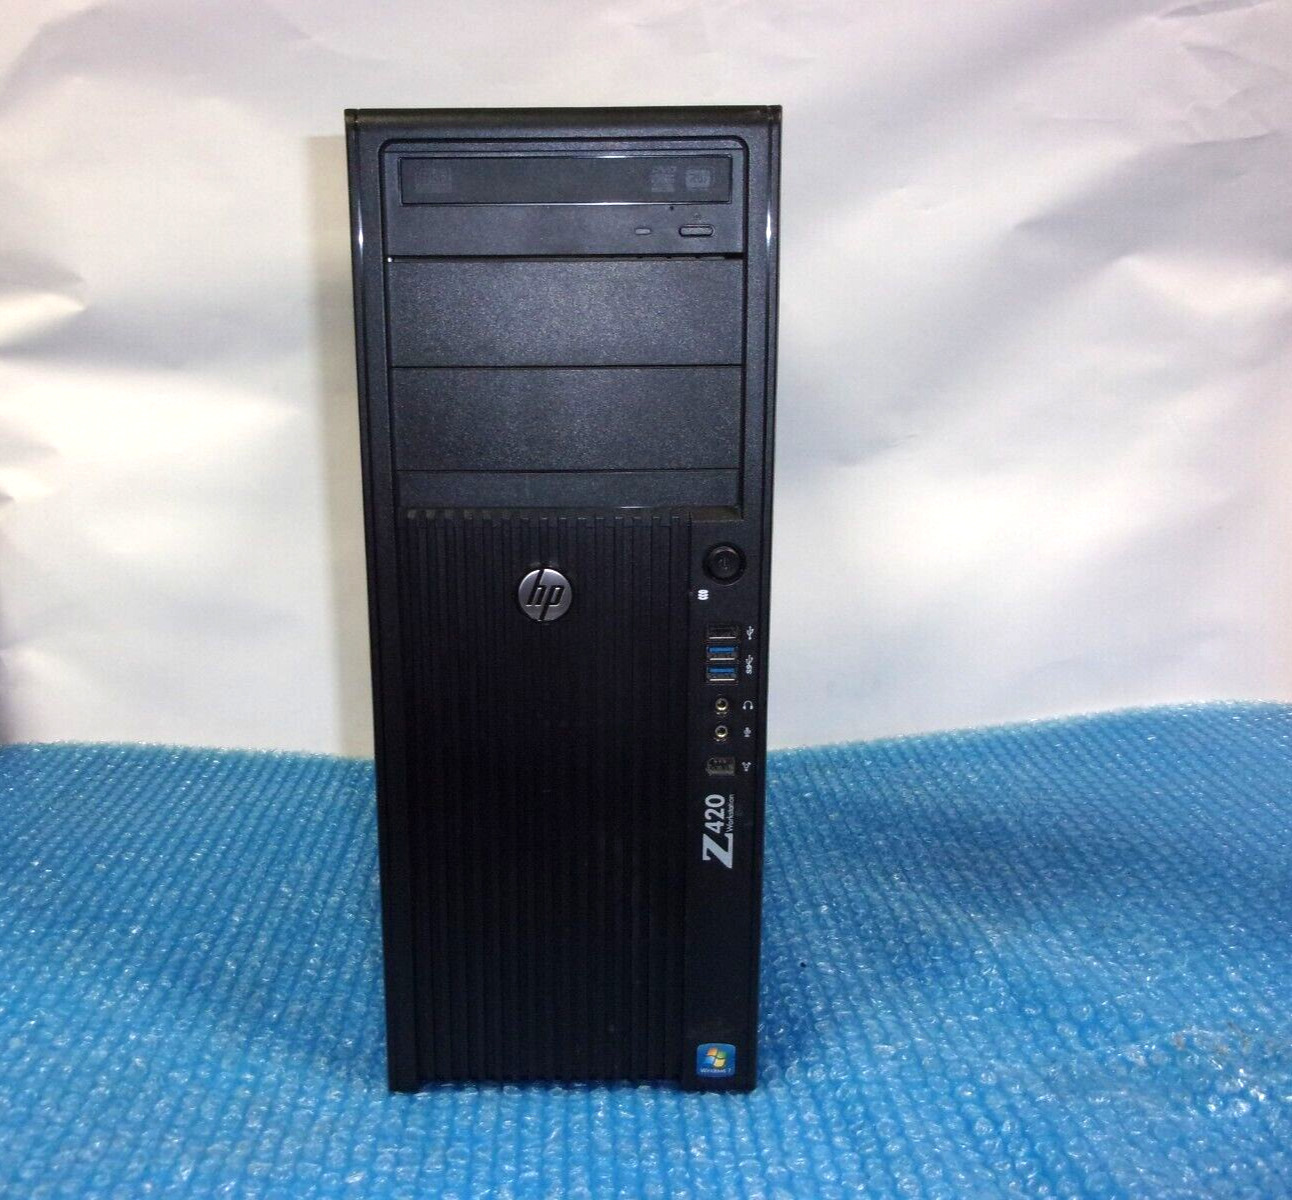 HP Z420 Tower Workstation Xeon E5-1620 3.60GHz, 4GB Ram, NO HDD, NO OS